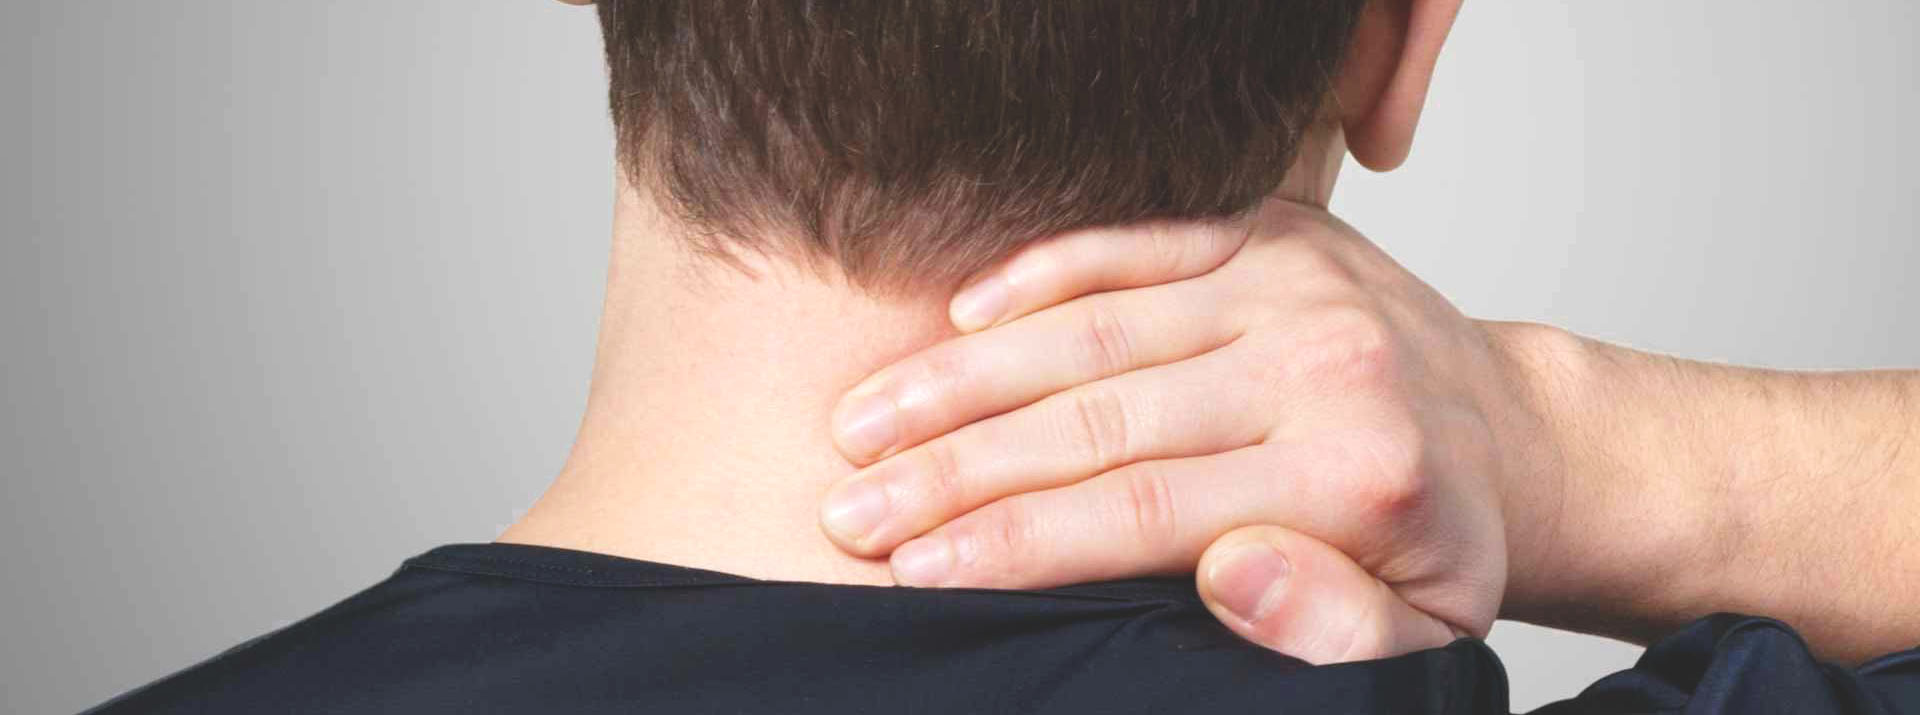 Chiropractic, Helps, Neck Pain, Chiropractor, Back pain, Chichester, West Sussex